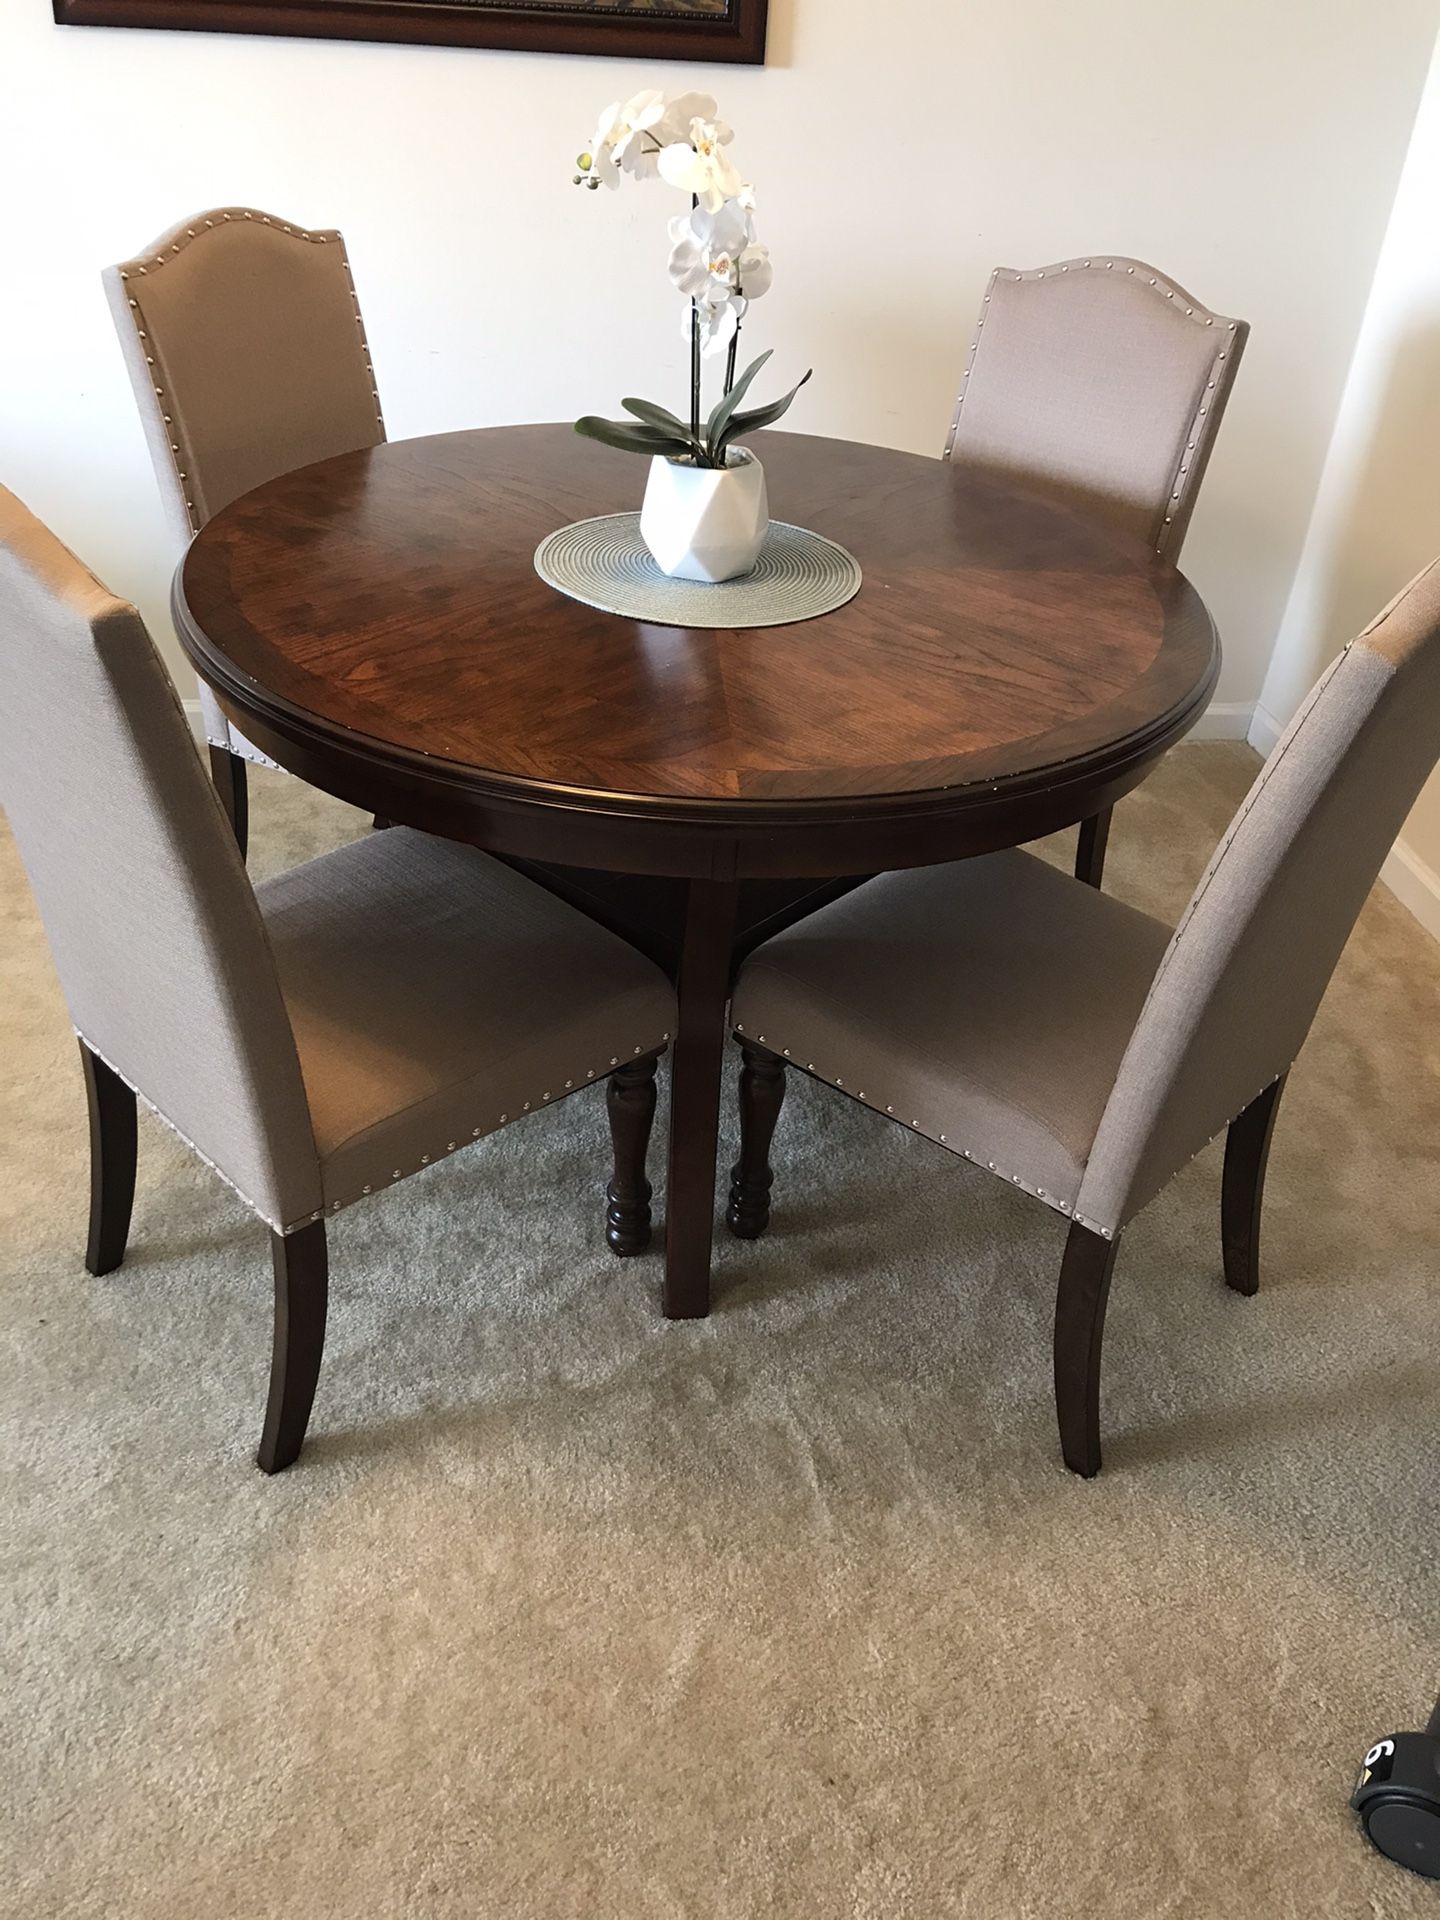 Dining table 48” round solid wood brown $195 (just the table)pick up only